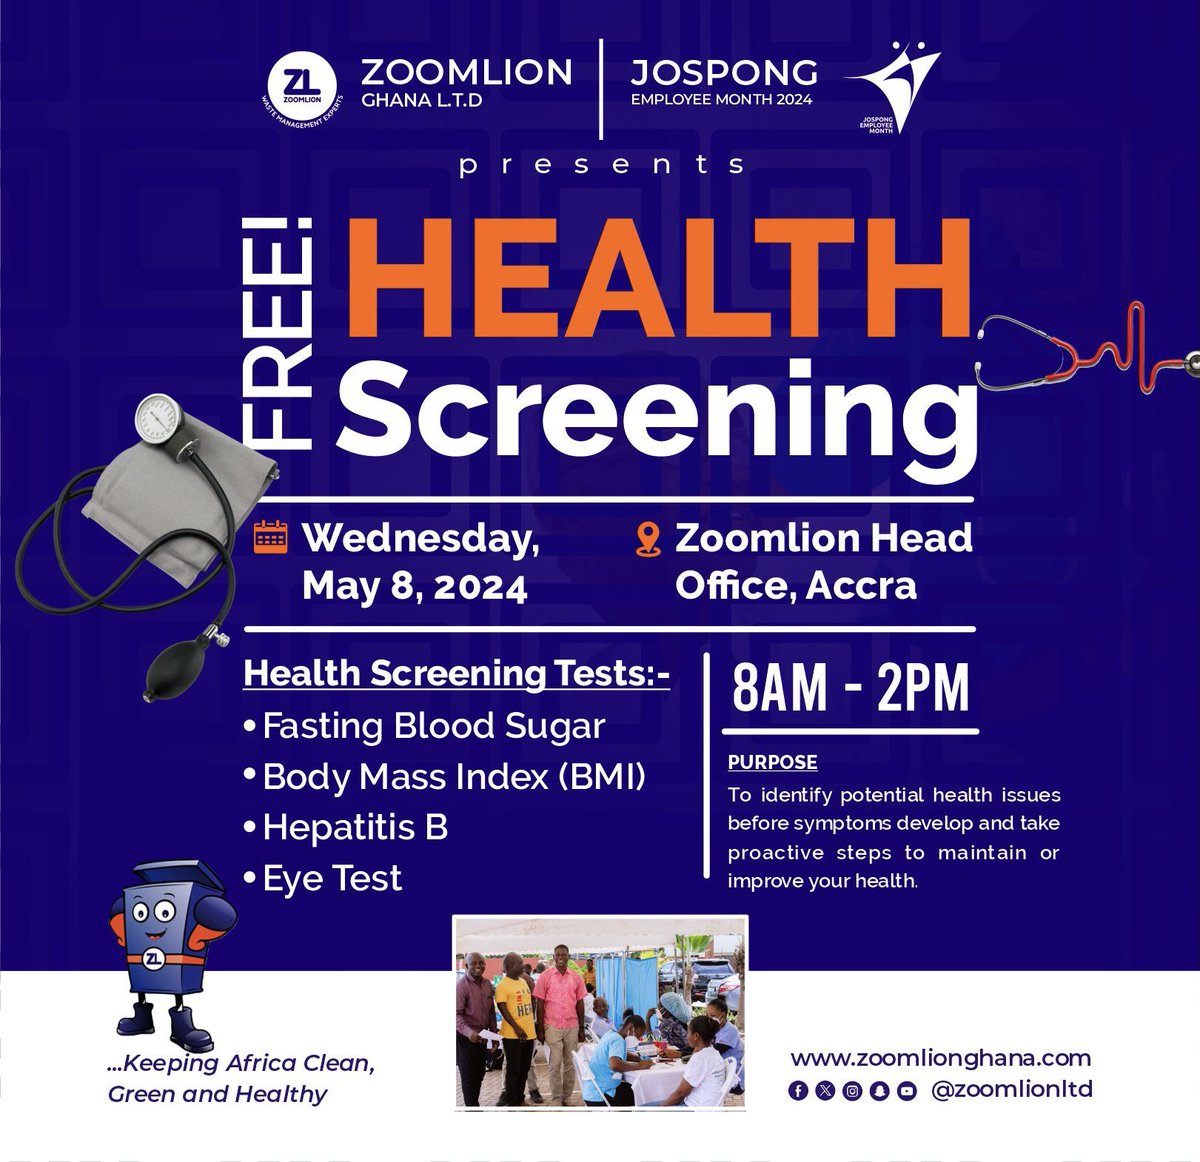 Be part of this Special Health Screening exercise on Wed, May 8, 2024. Don't miss out on this opportunity to prioritize your health and wellness. Watch this page for amazing line-up activities in the month of May as we celebrate #JEM2024 See you... #Zoomlion